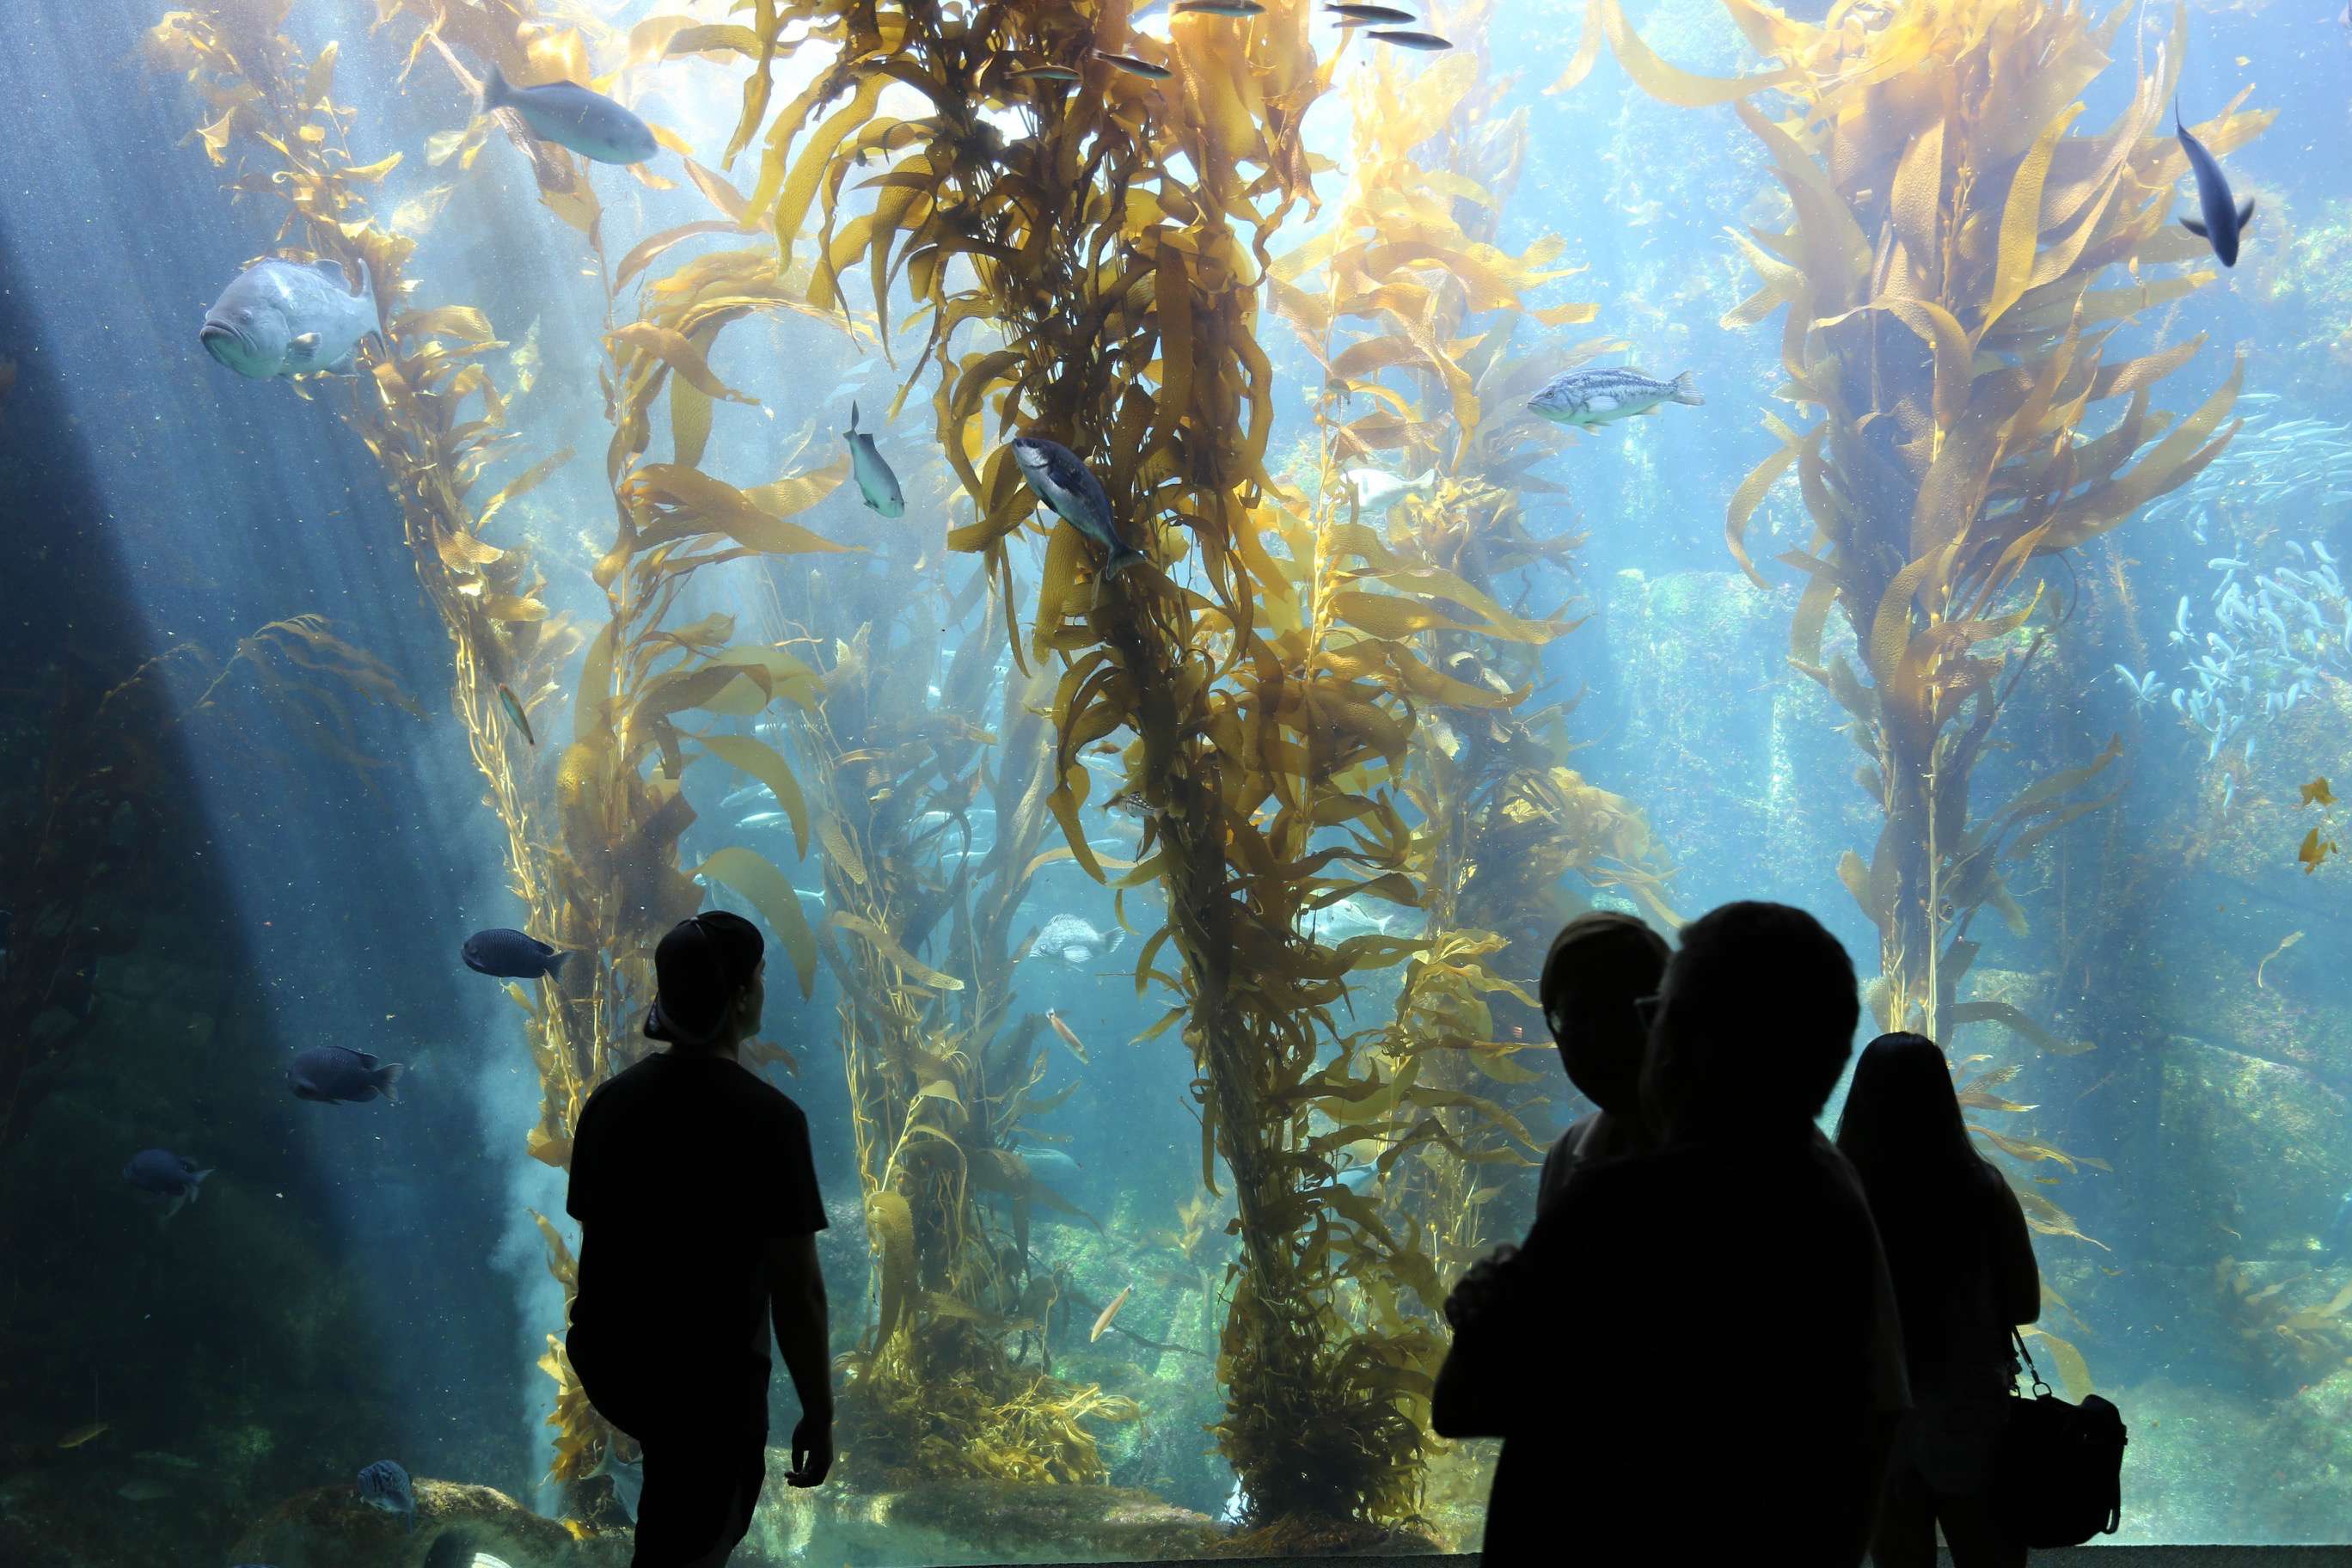 The Scripps Institution of Oceanography offers fascinating up-close views of marine life.